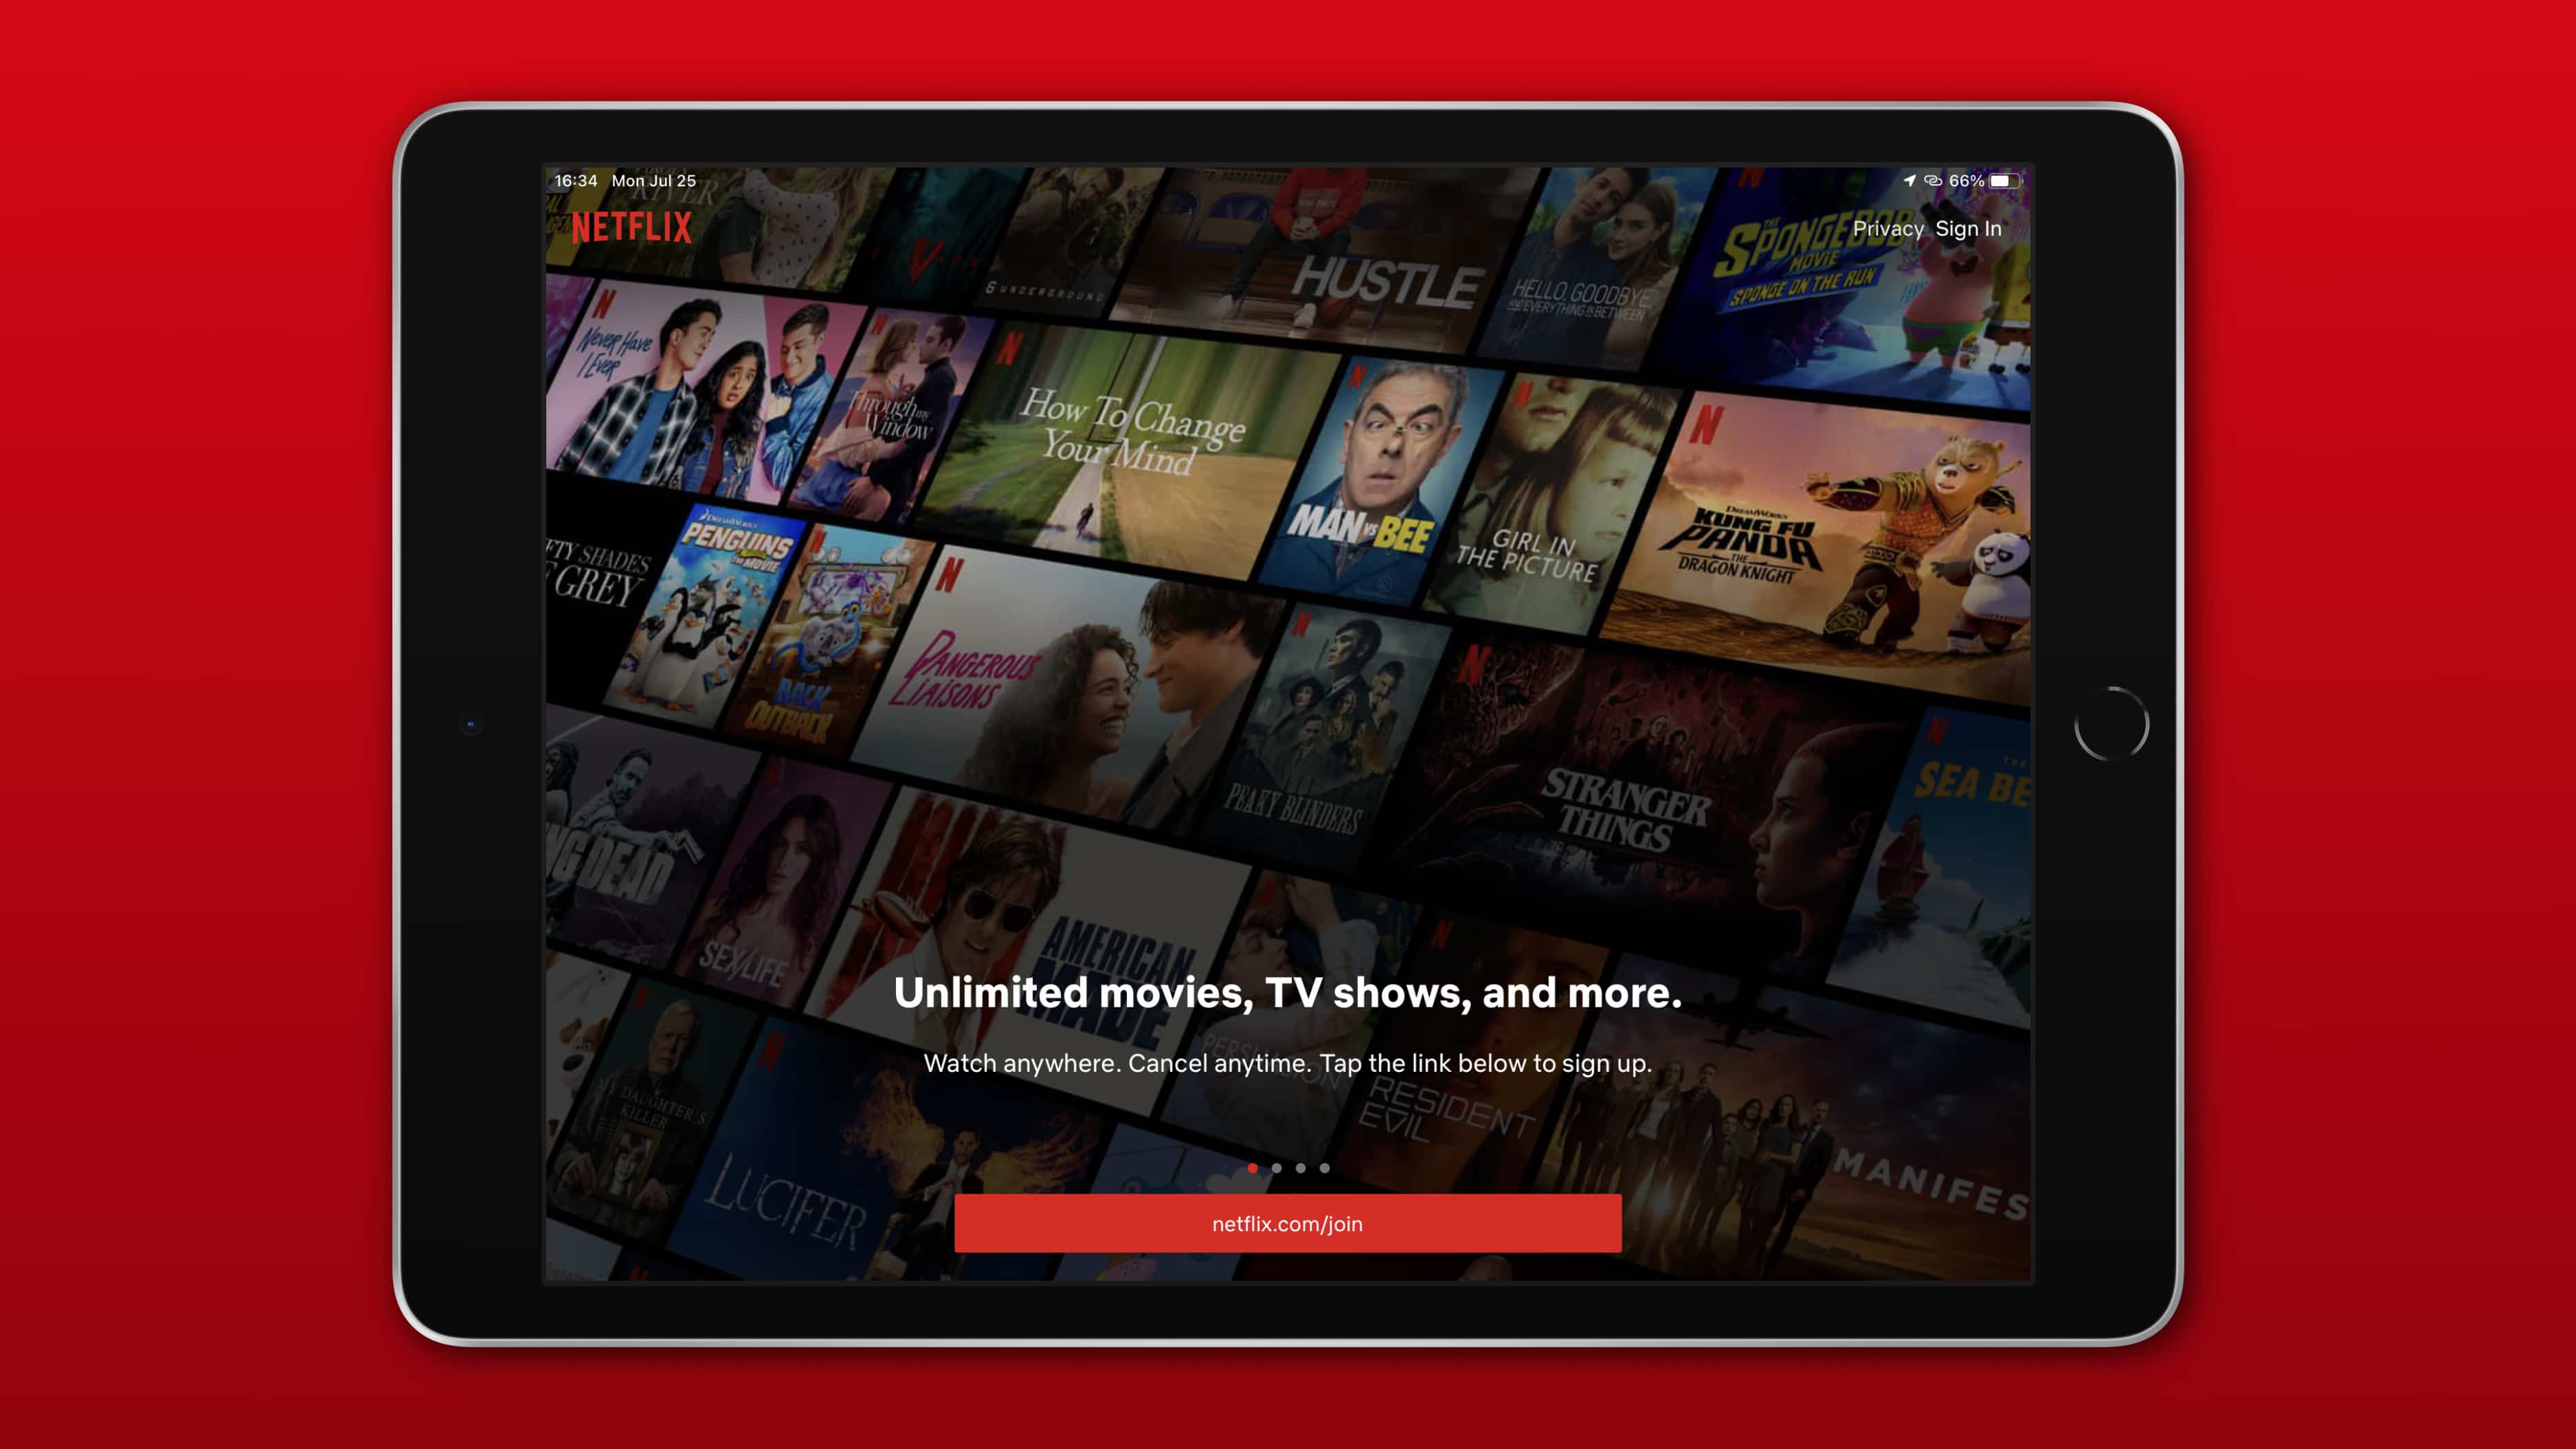 iPad screenshot showing the sign-in prompt in the Netflix app